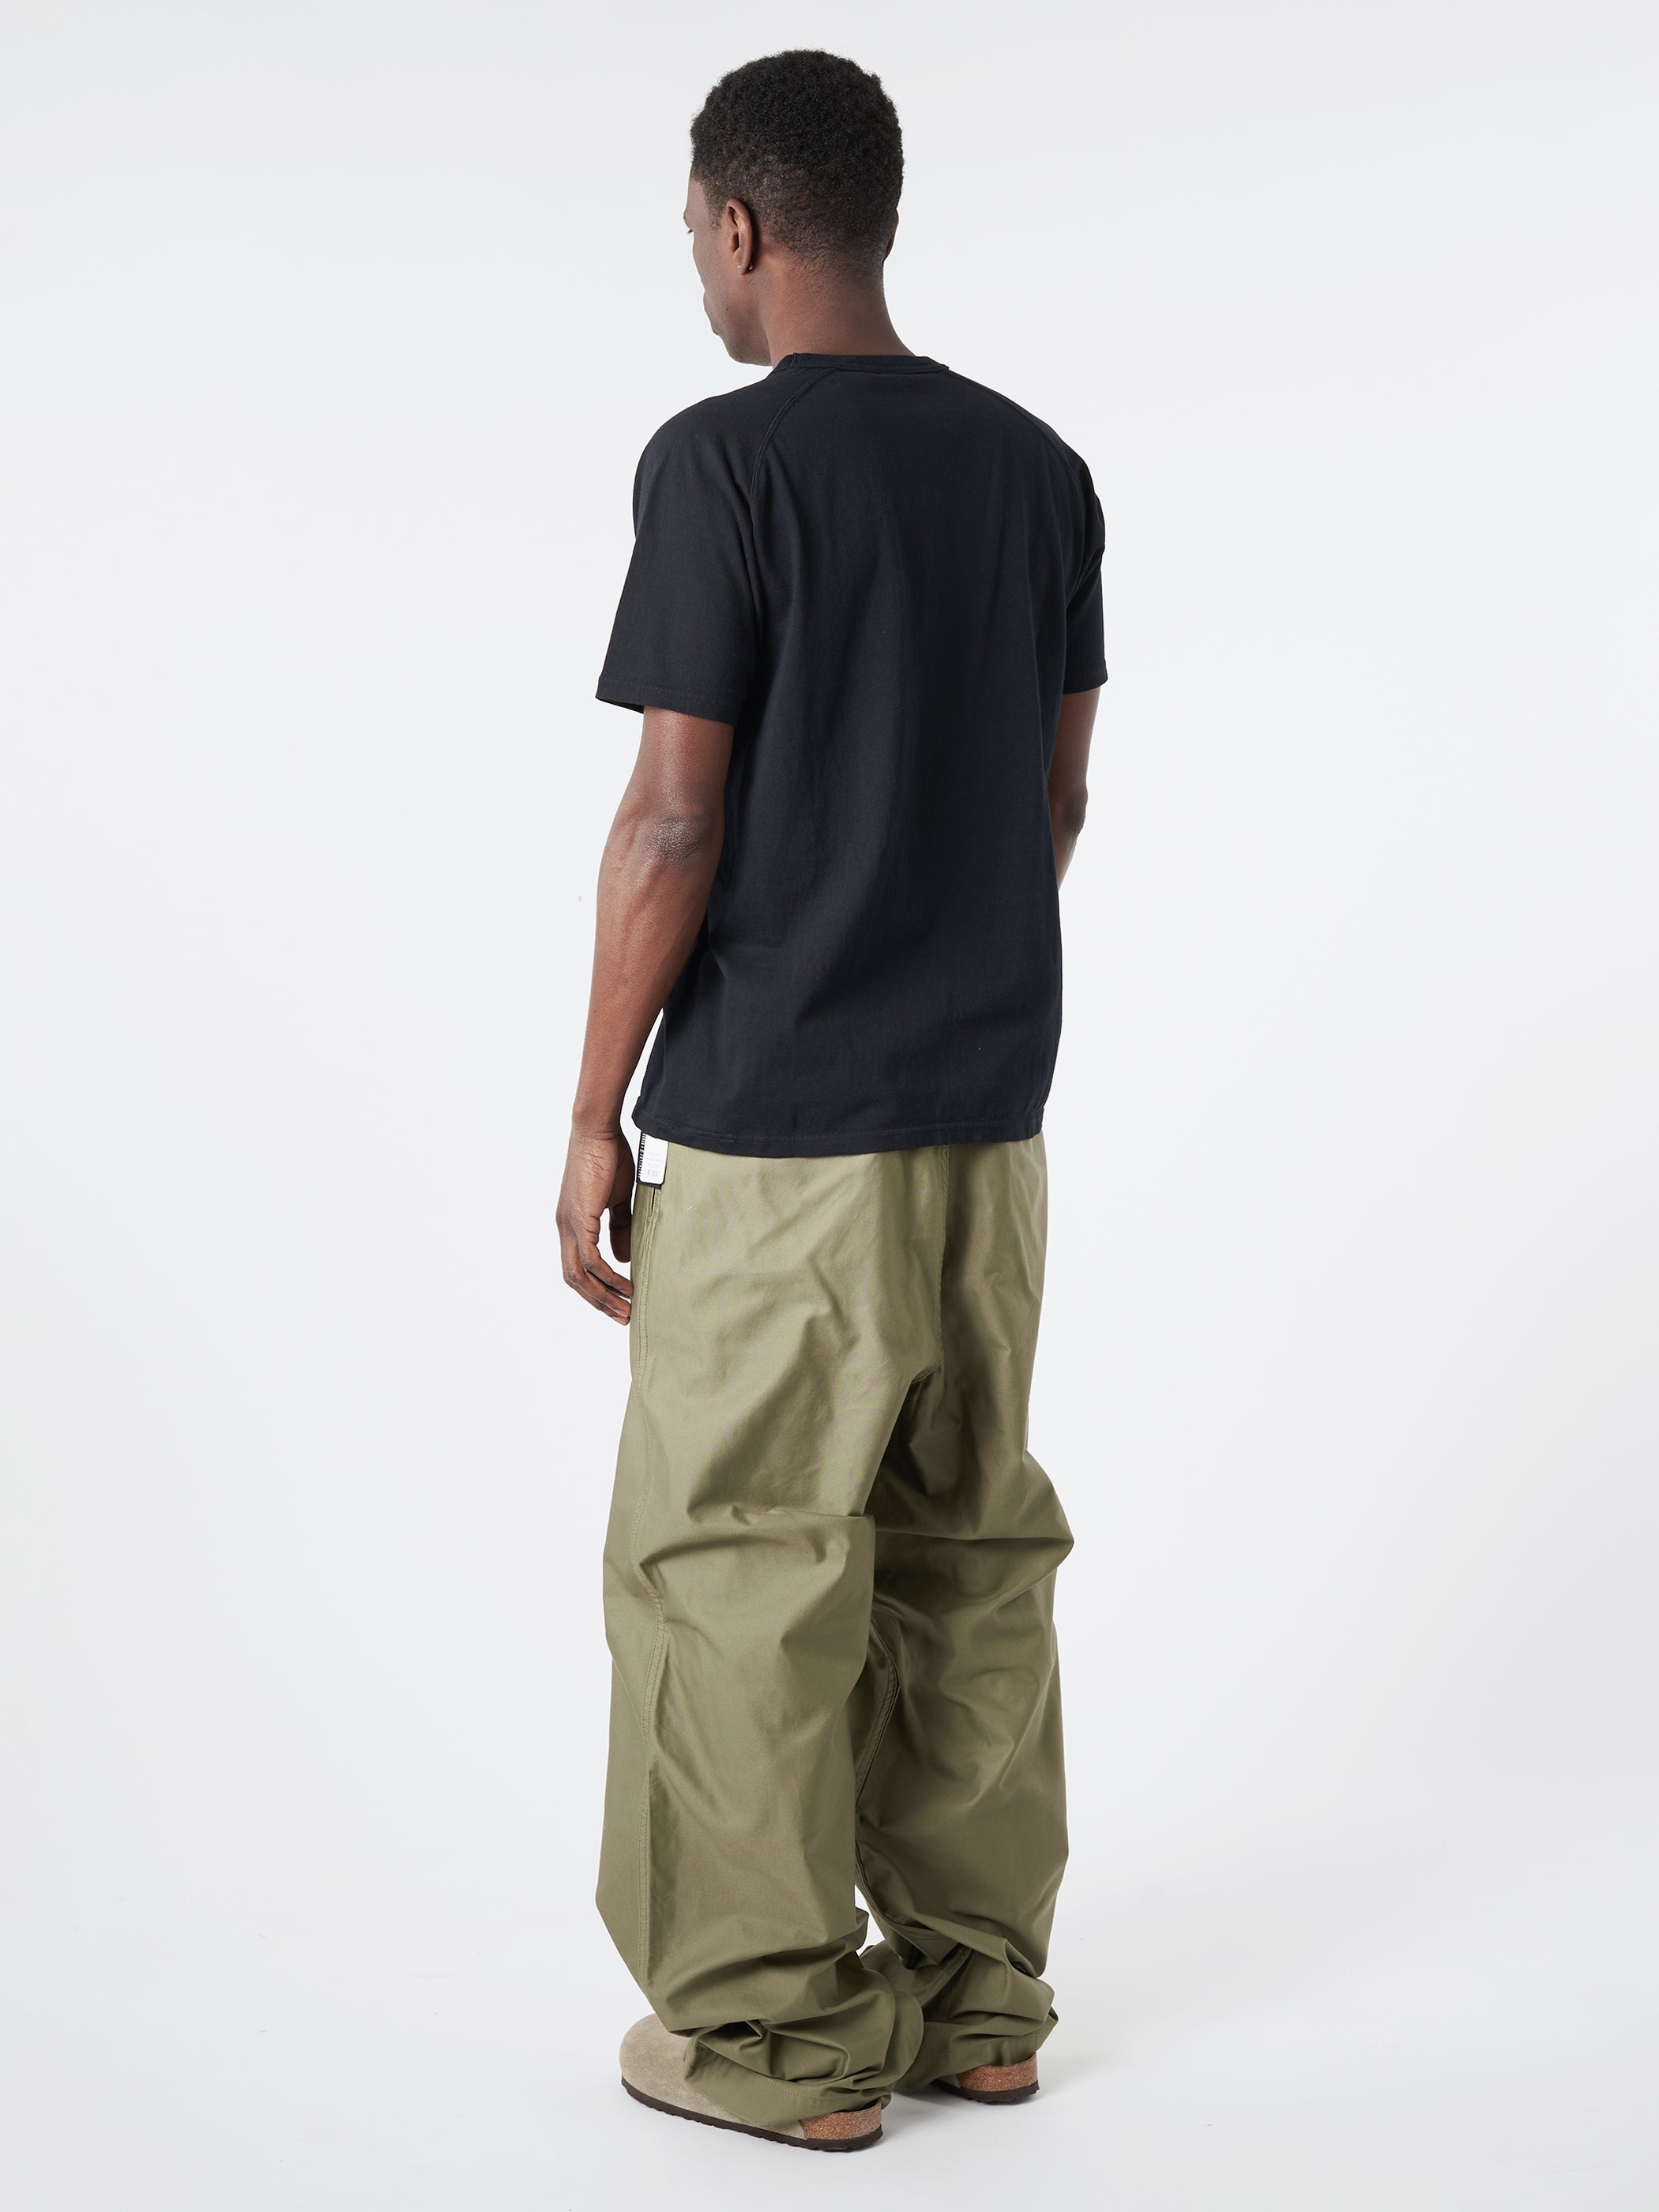 Nigel Cabourn - New Basic Chino Pant in Green – gravitypope